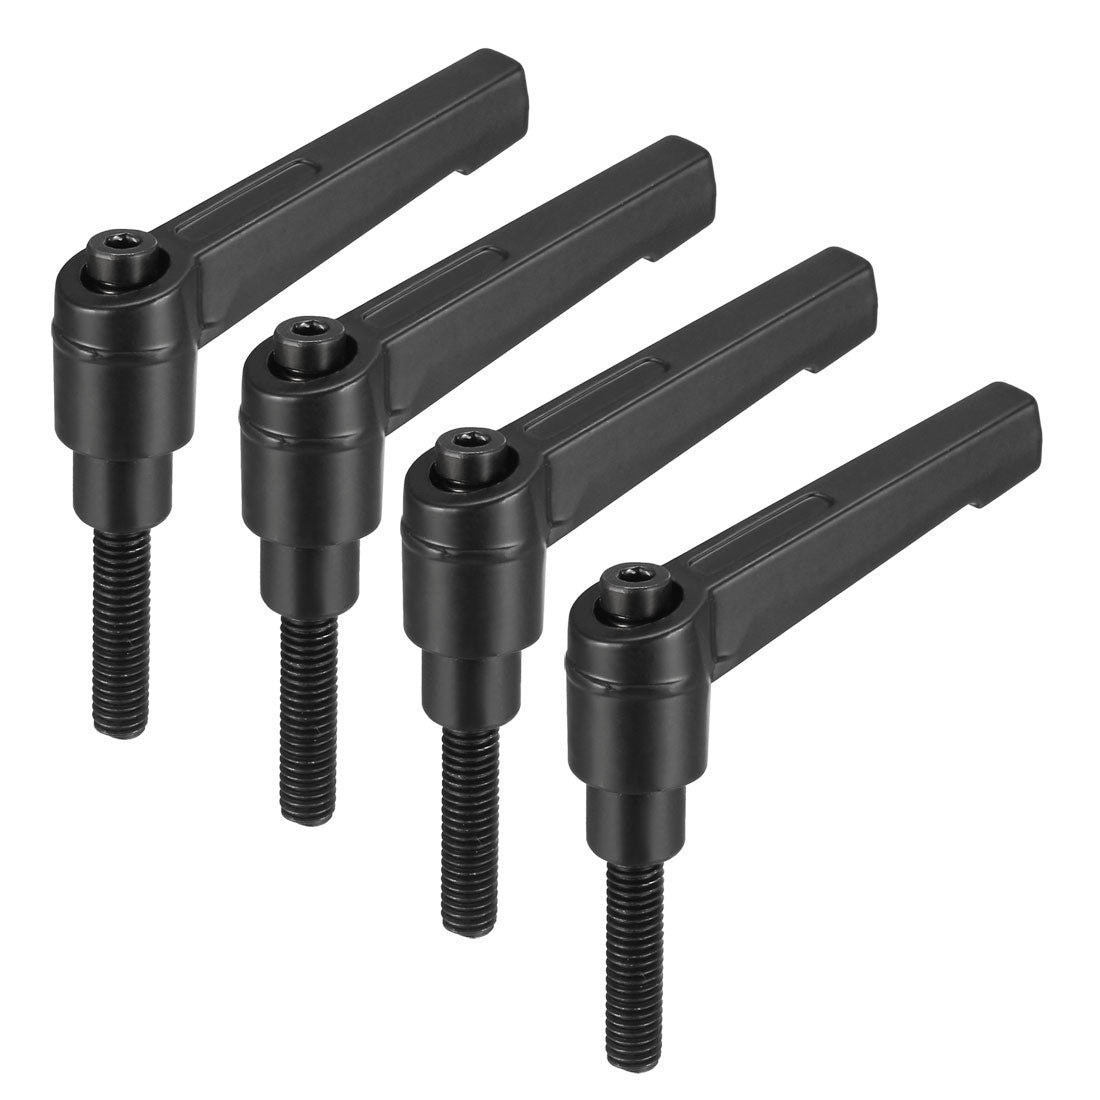 Uxcell Uxcell M6 x 25mmThread Push Button Ratchet Level Adjustable Handle Male Threaded Stud 4Pcs